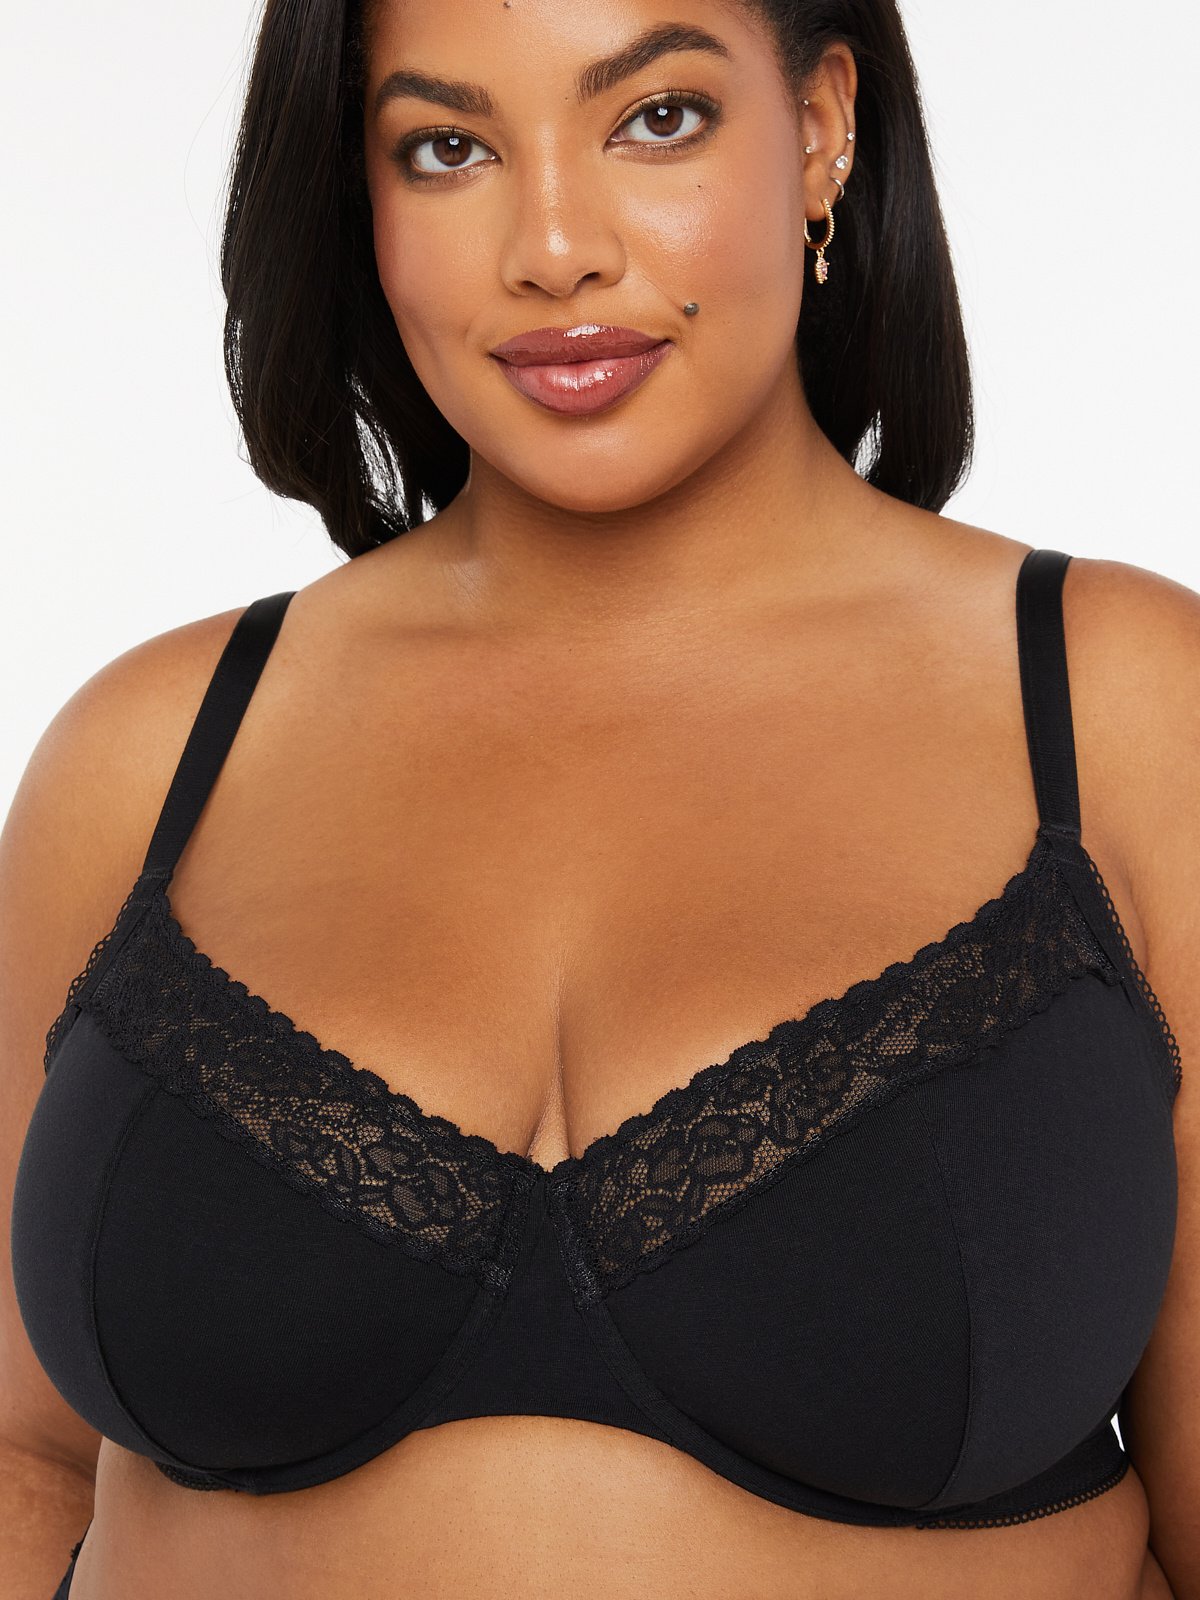 BLAKE & CO. Mesh Inset Bralette – Unlined Bra with Adjustable